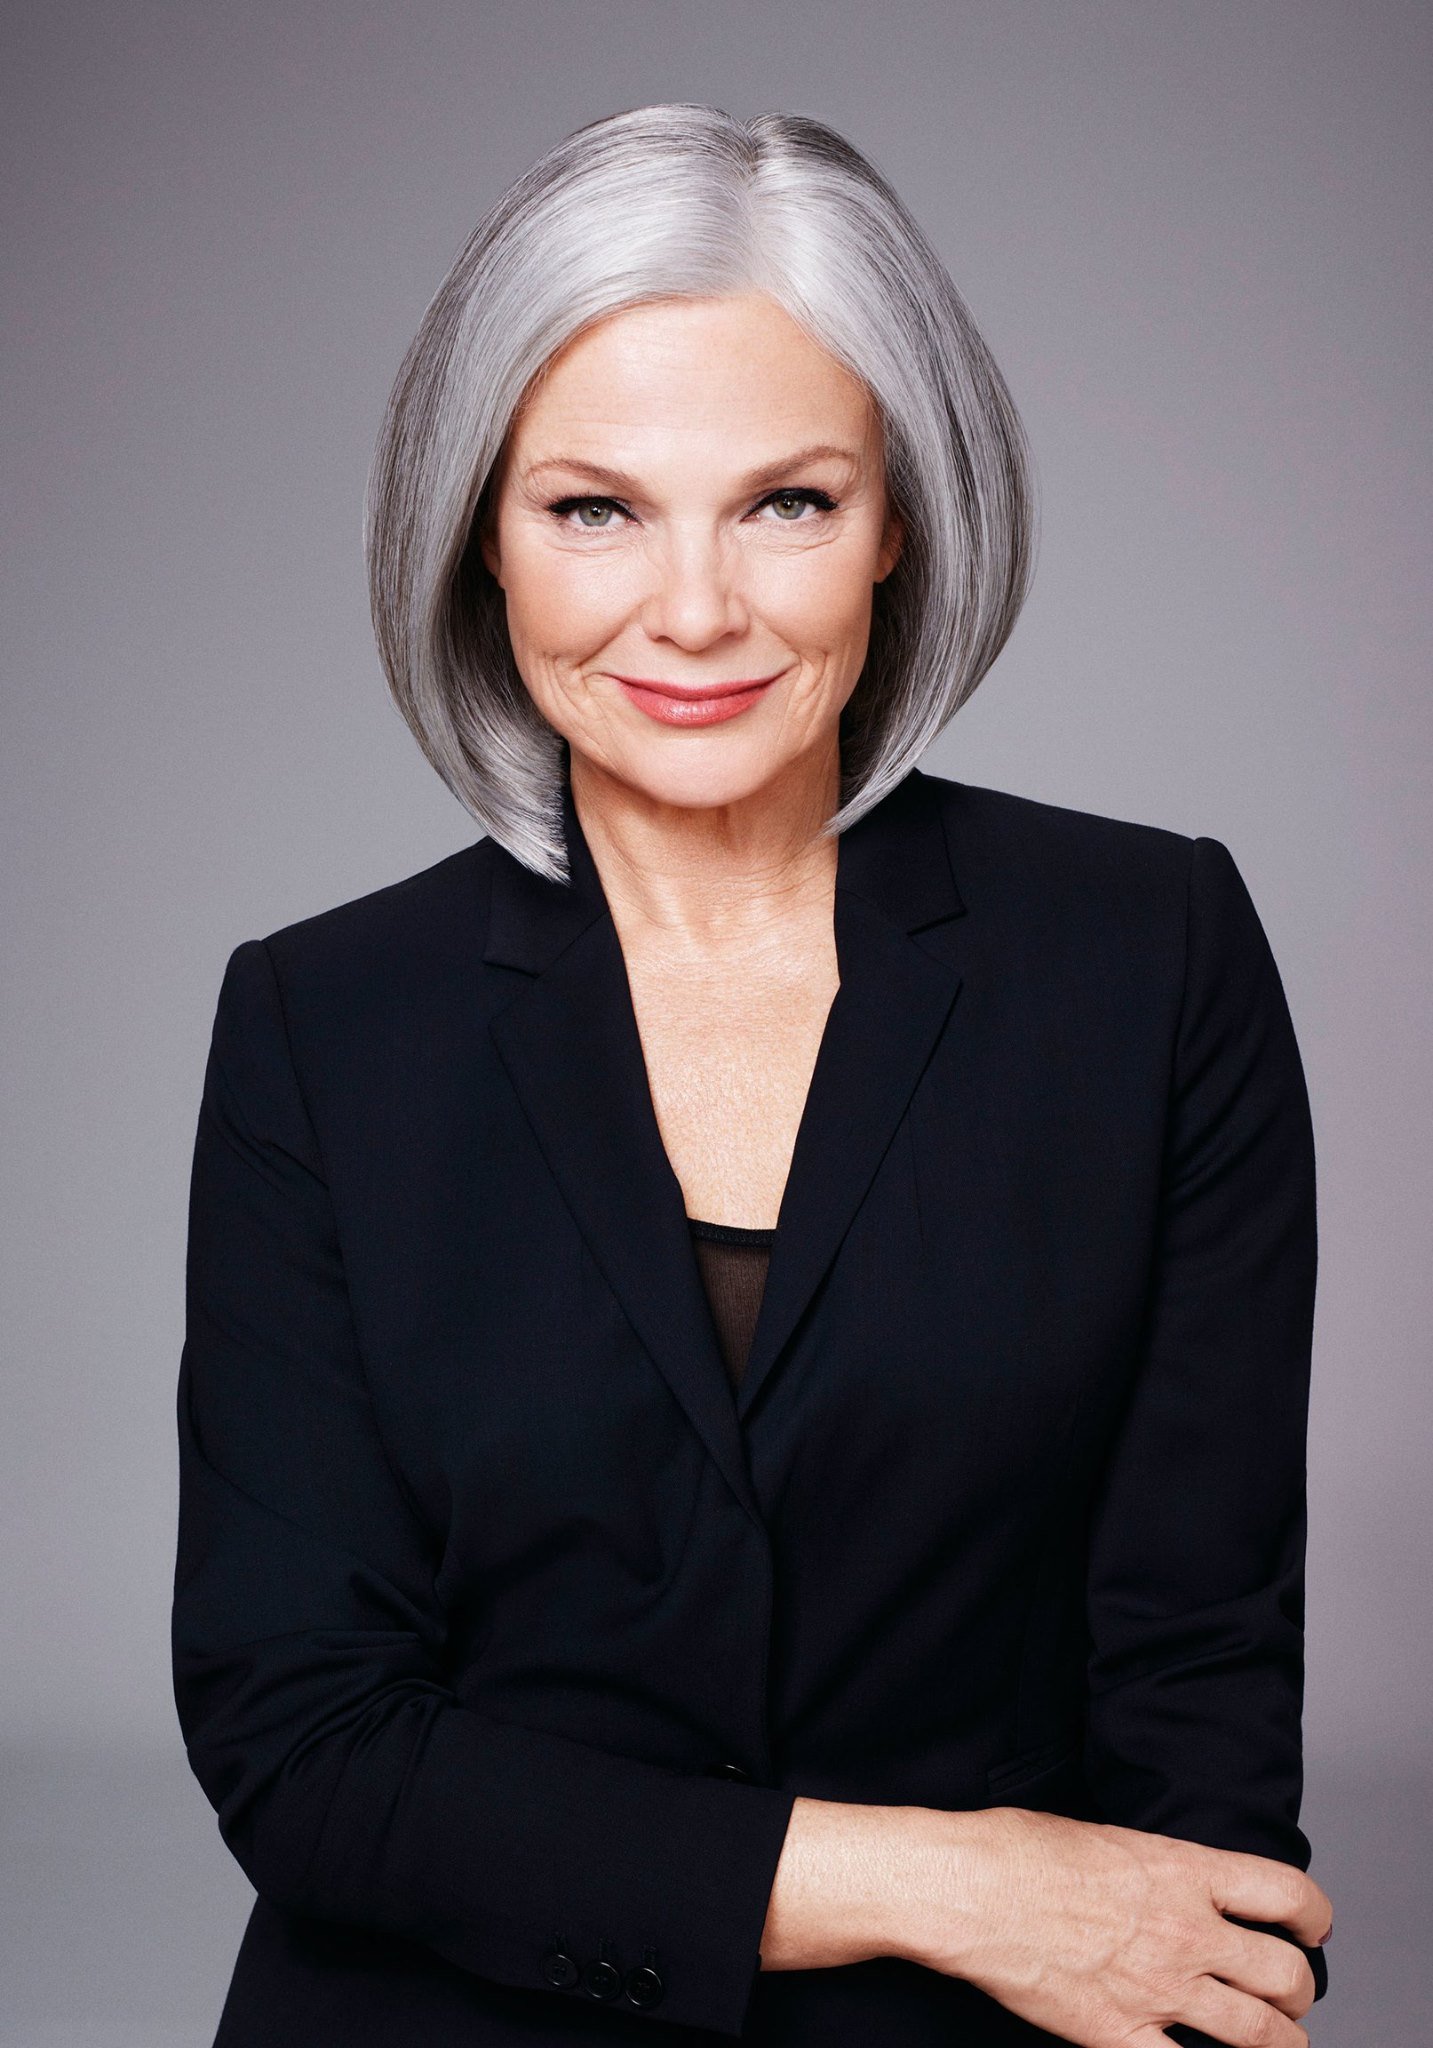 Medium bob for ladies over 60: 12 ideas that emphasize modern style